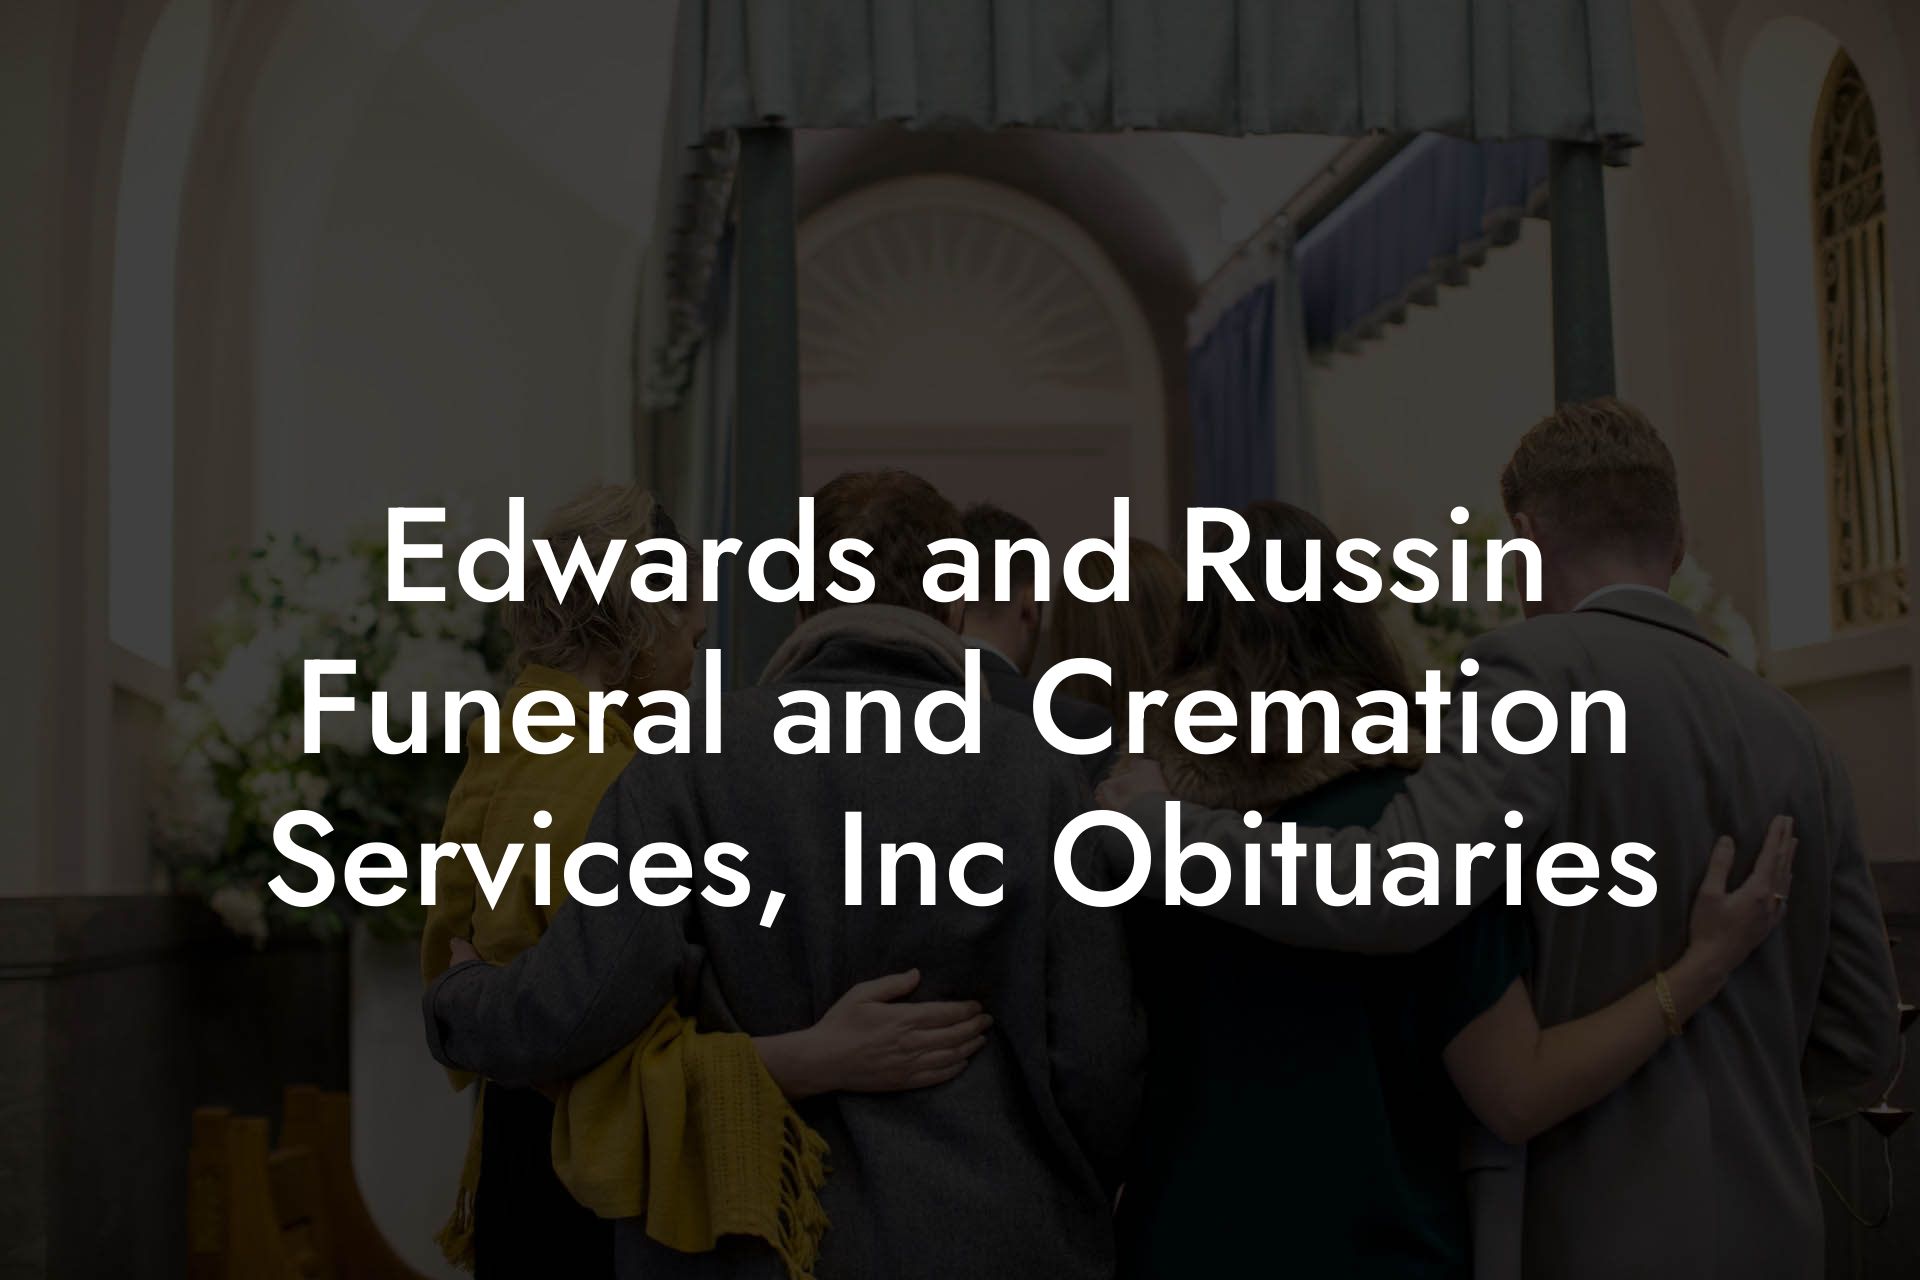 Edwards and Russin Funeral and Cremation Services, Inc Obituaries